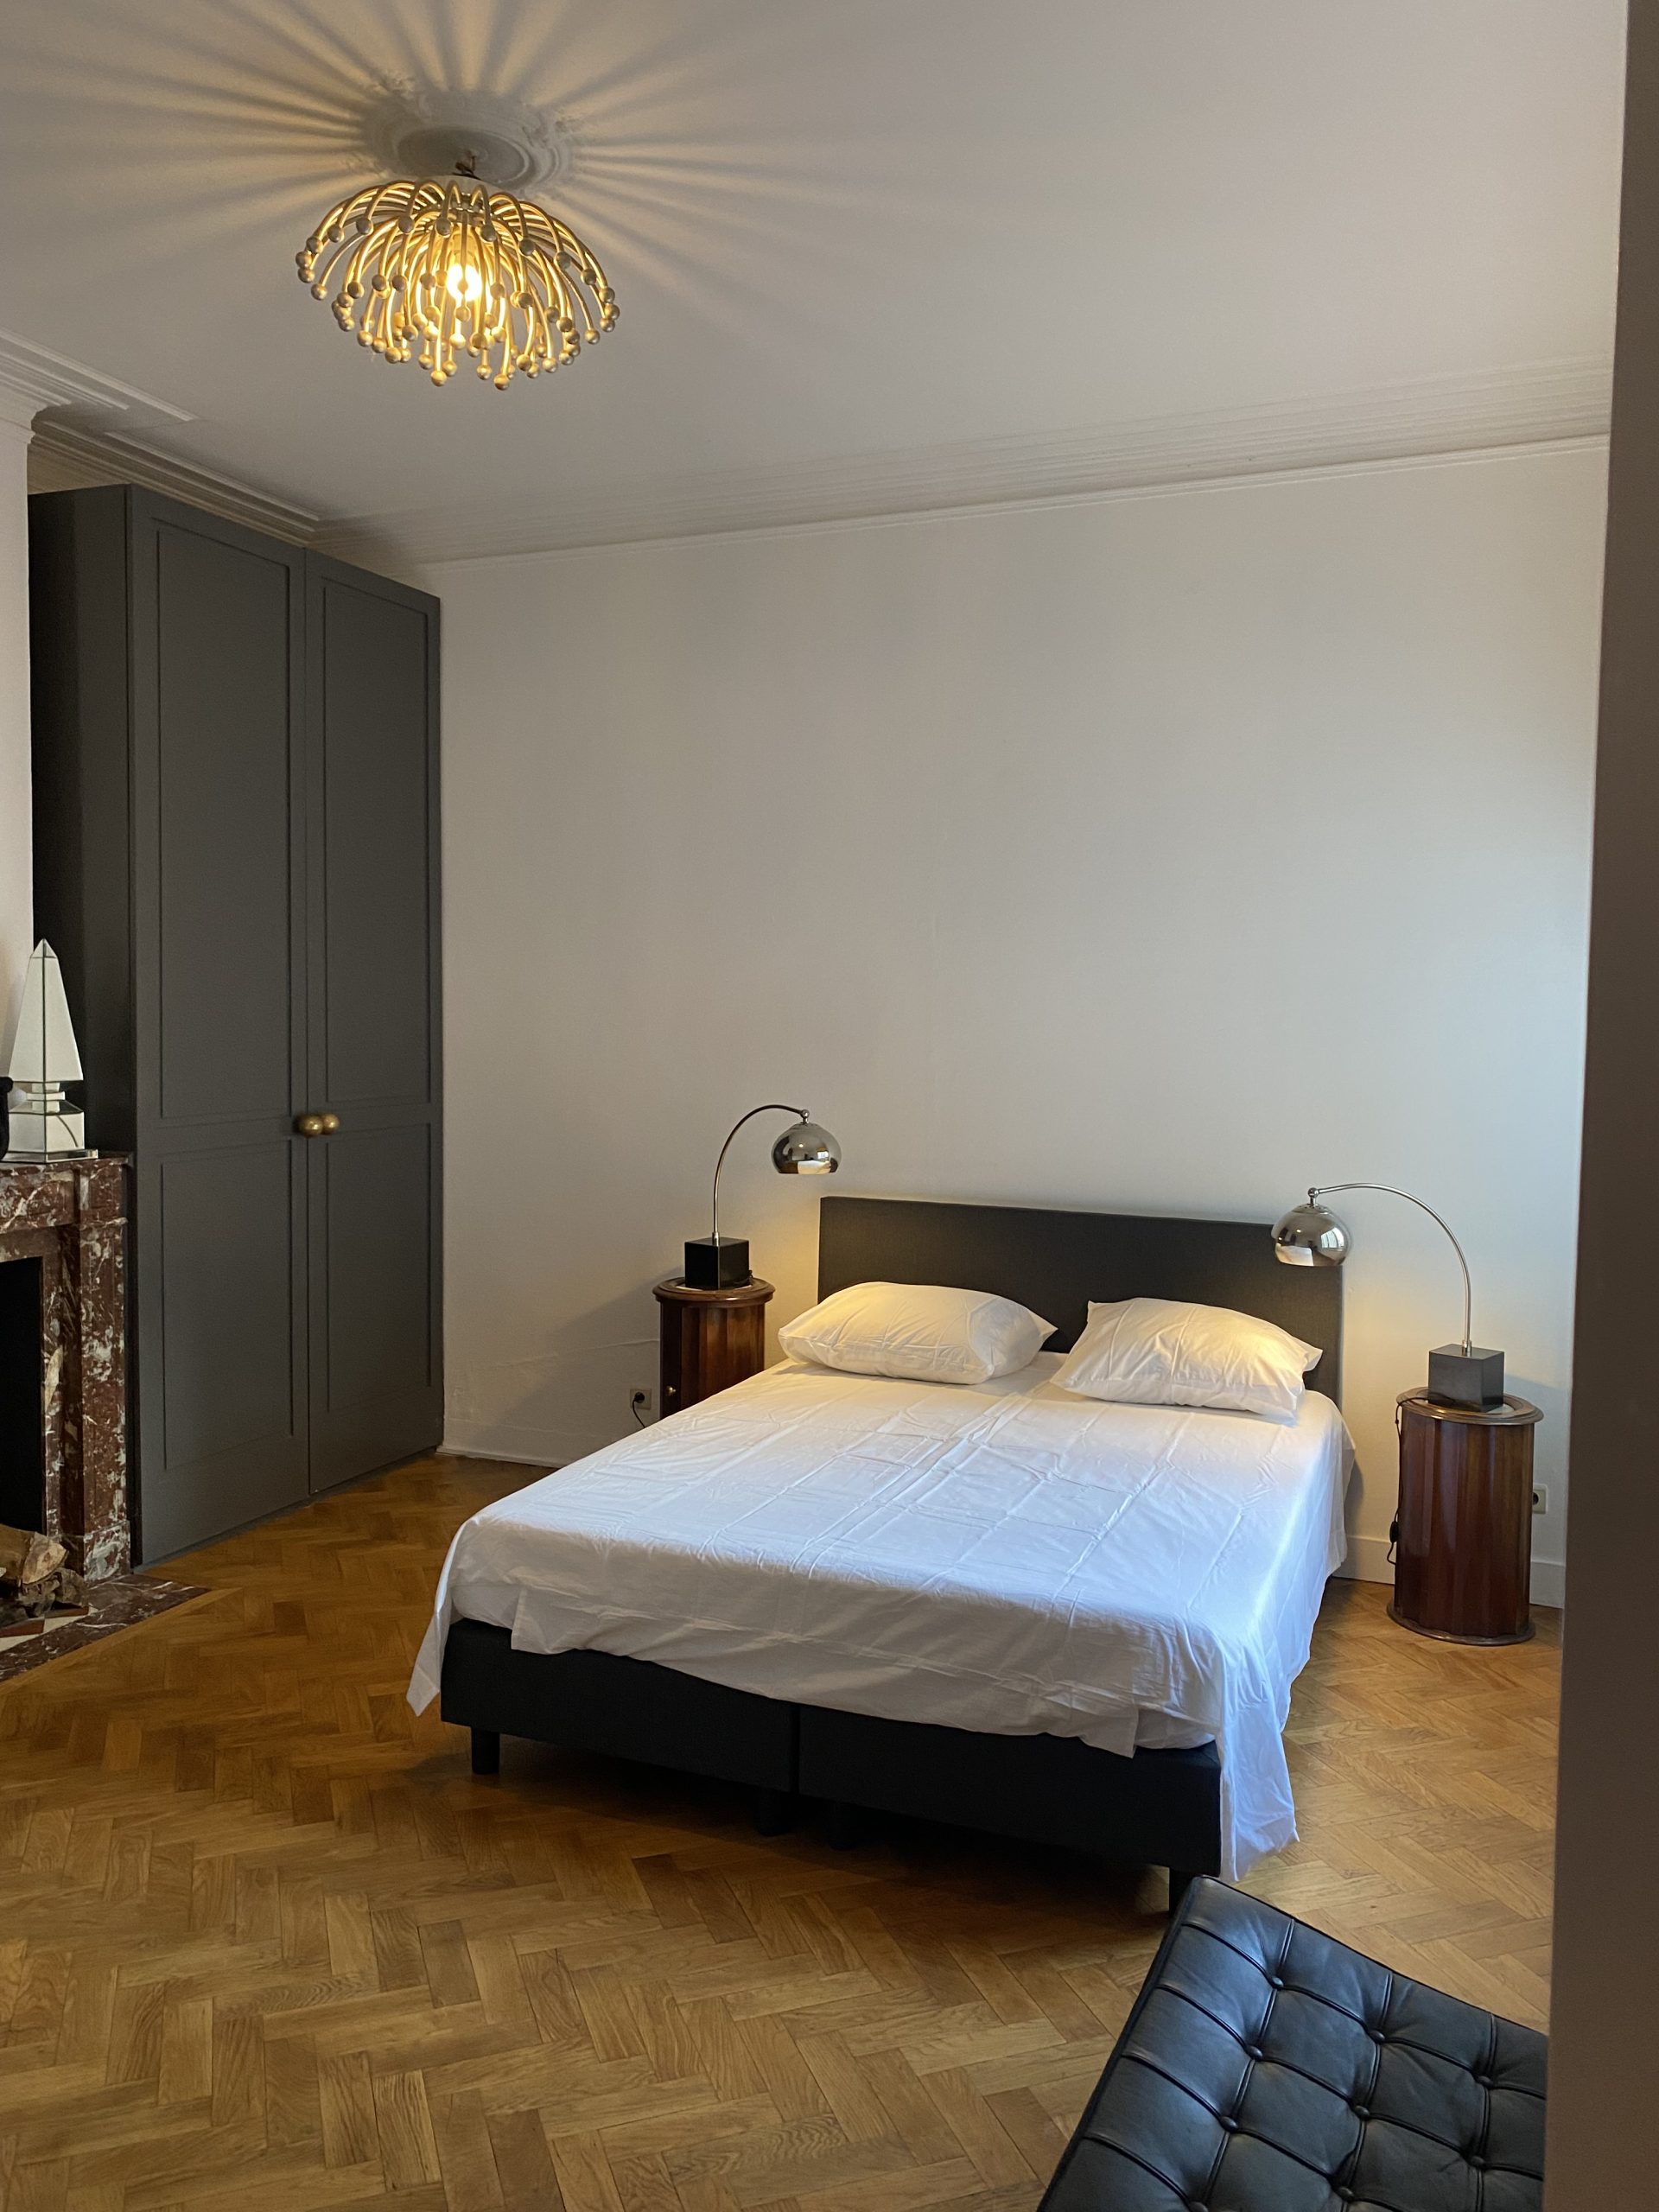 Molière - Exclusive apartment for rent in Brussels - bedroom